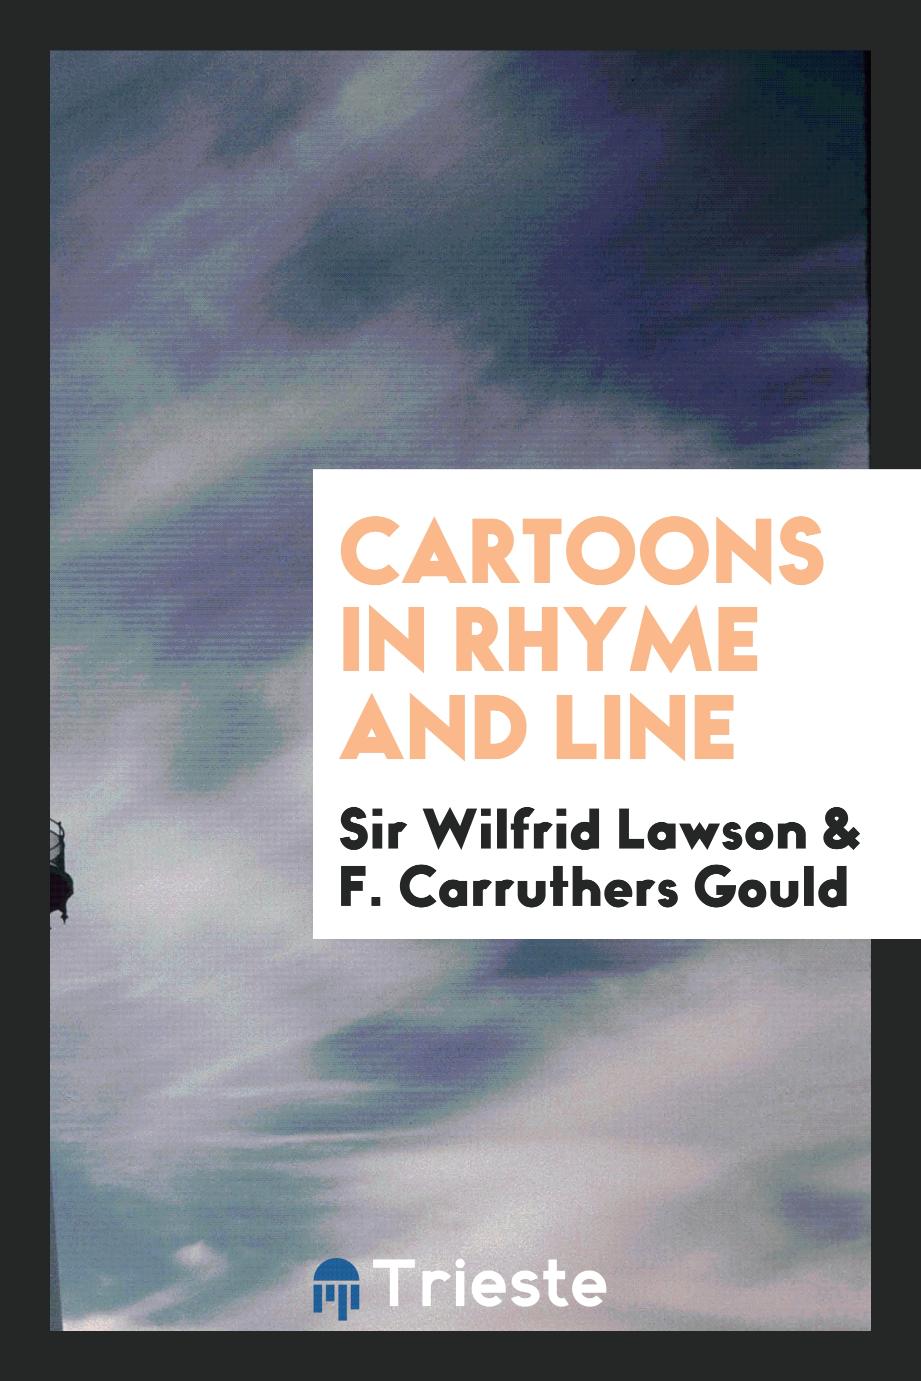 Cartoons in rhyme and line